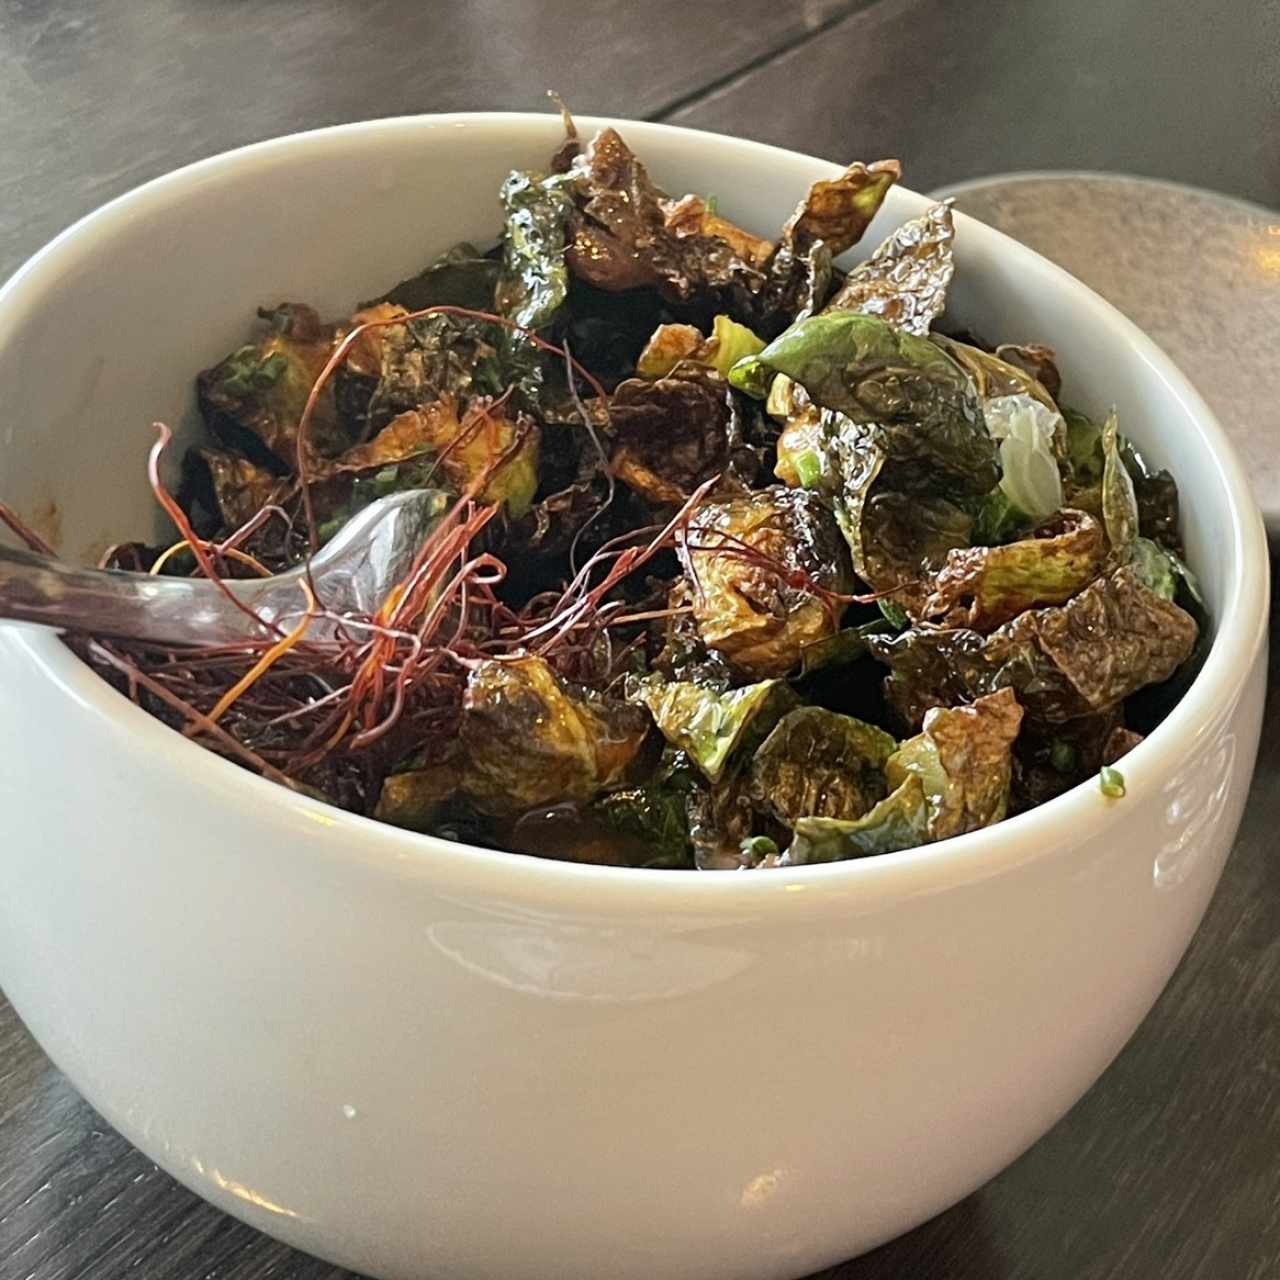 HOT - CRISPY BRUSSELS SPROUTS